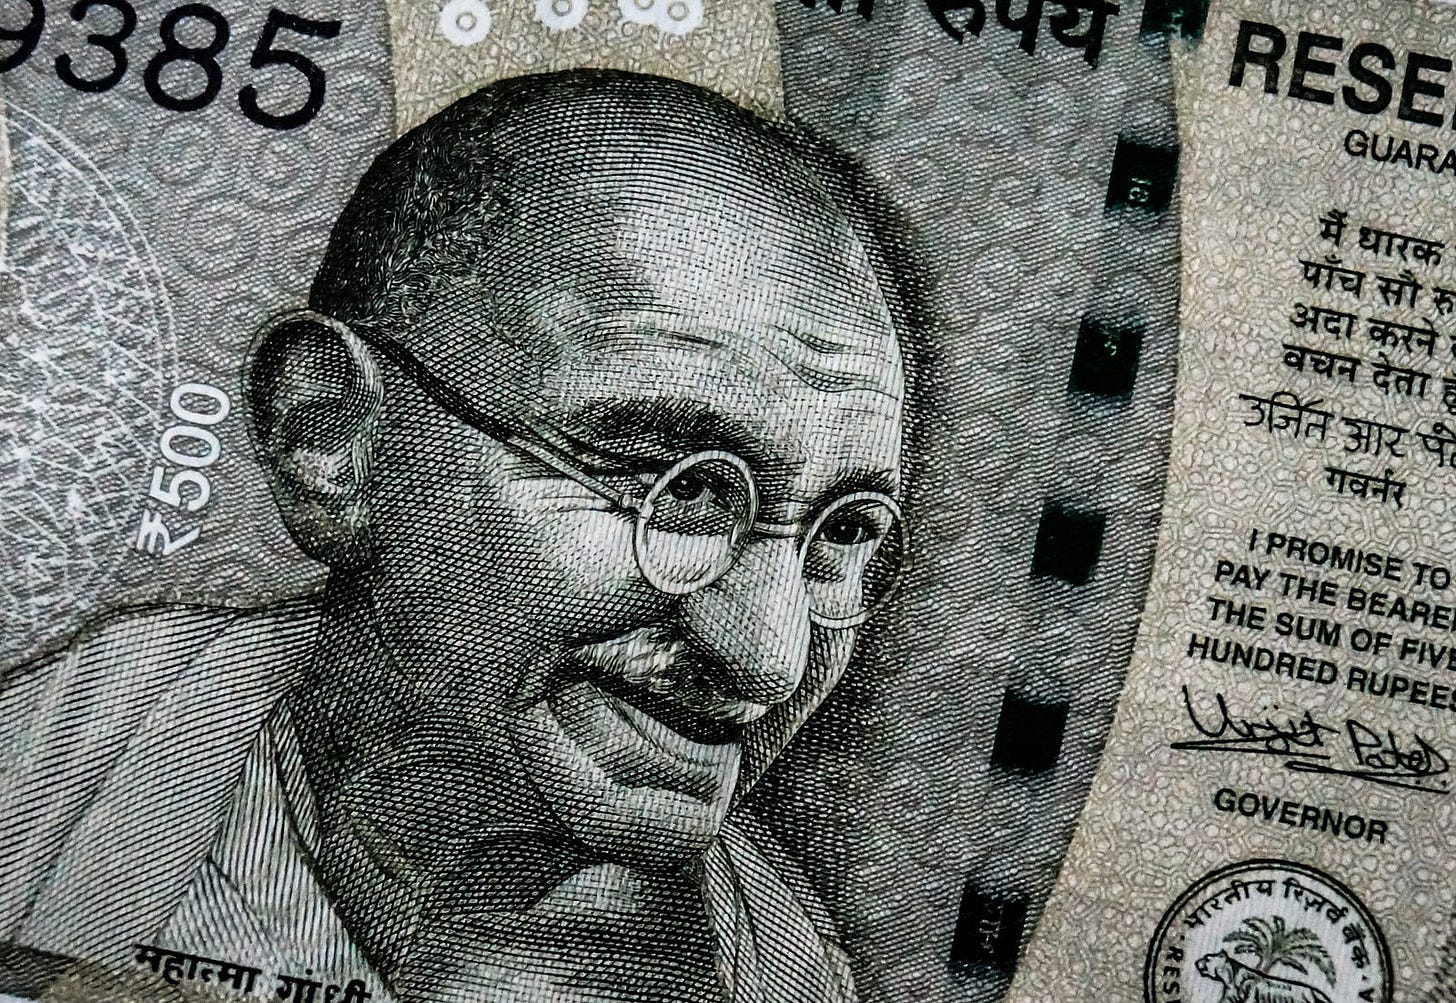 Mohandas Gandhi — also known as Mahatma Gandhi on Indian currency notes (Credits: Unsplash)